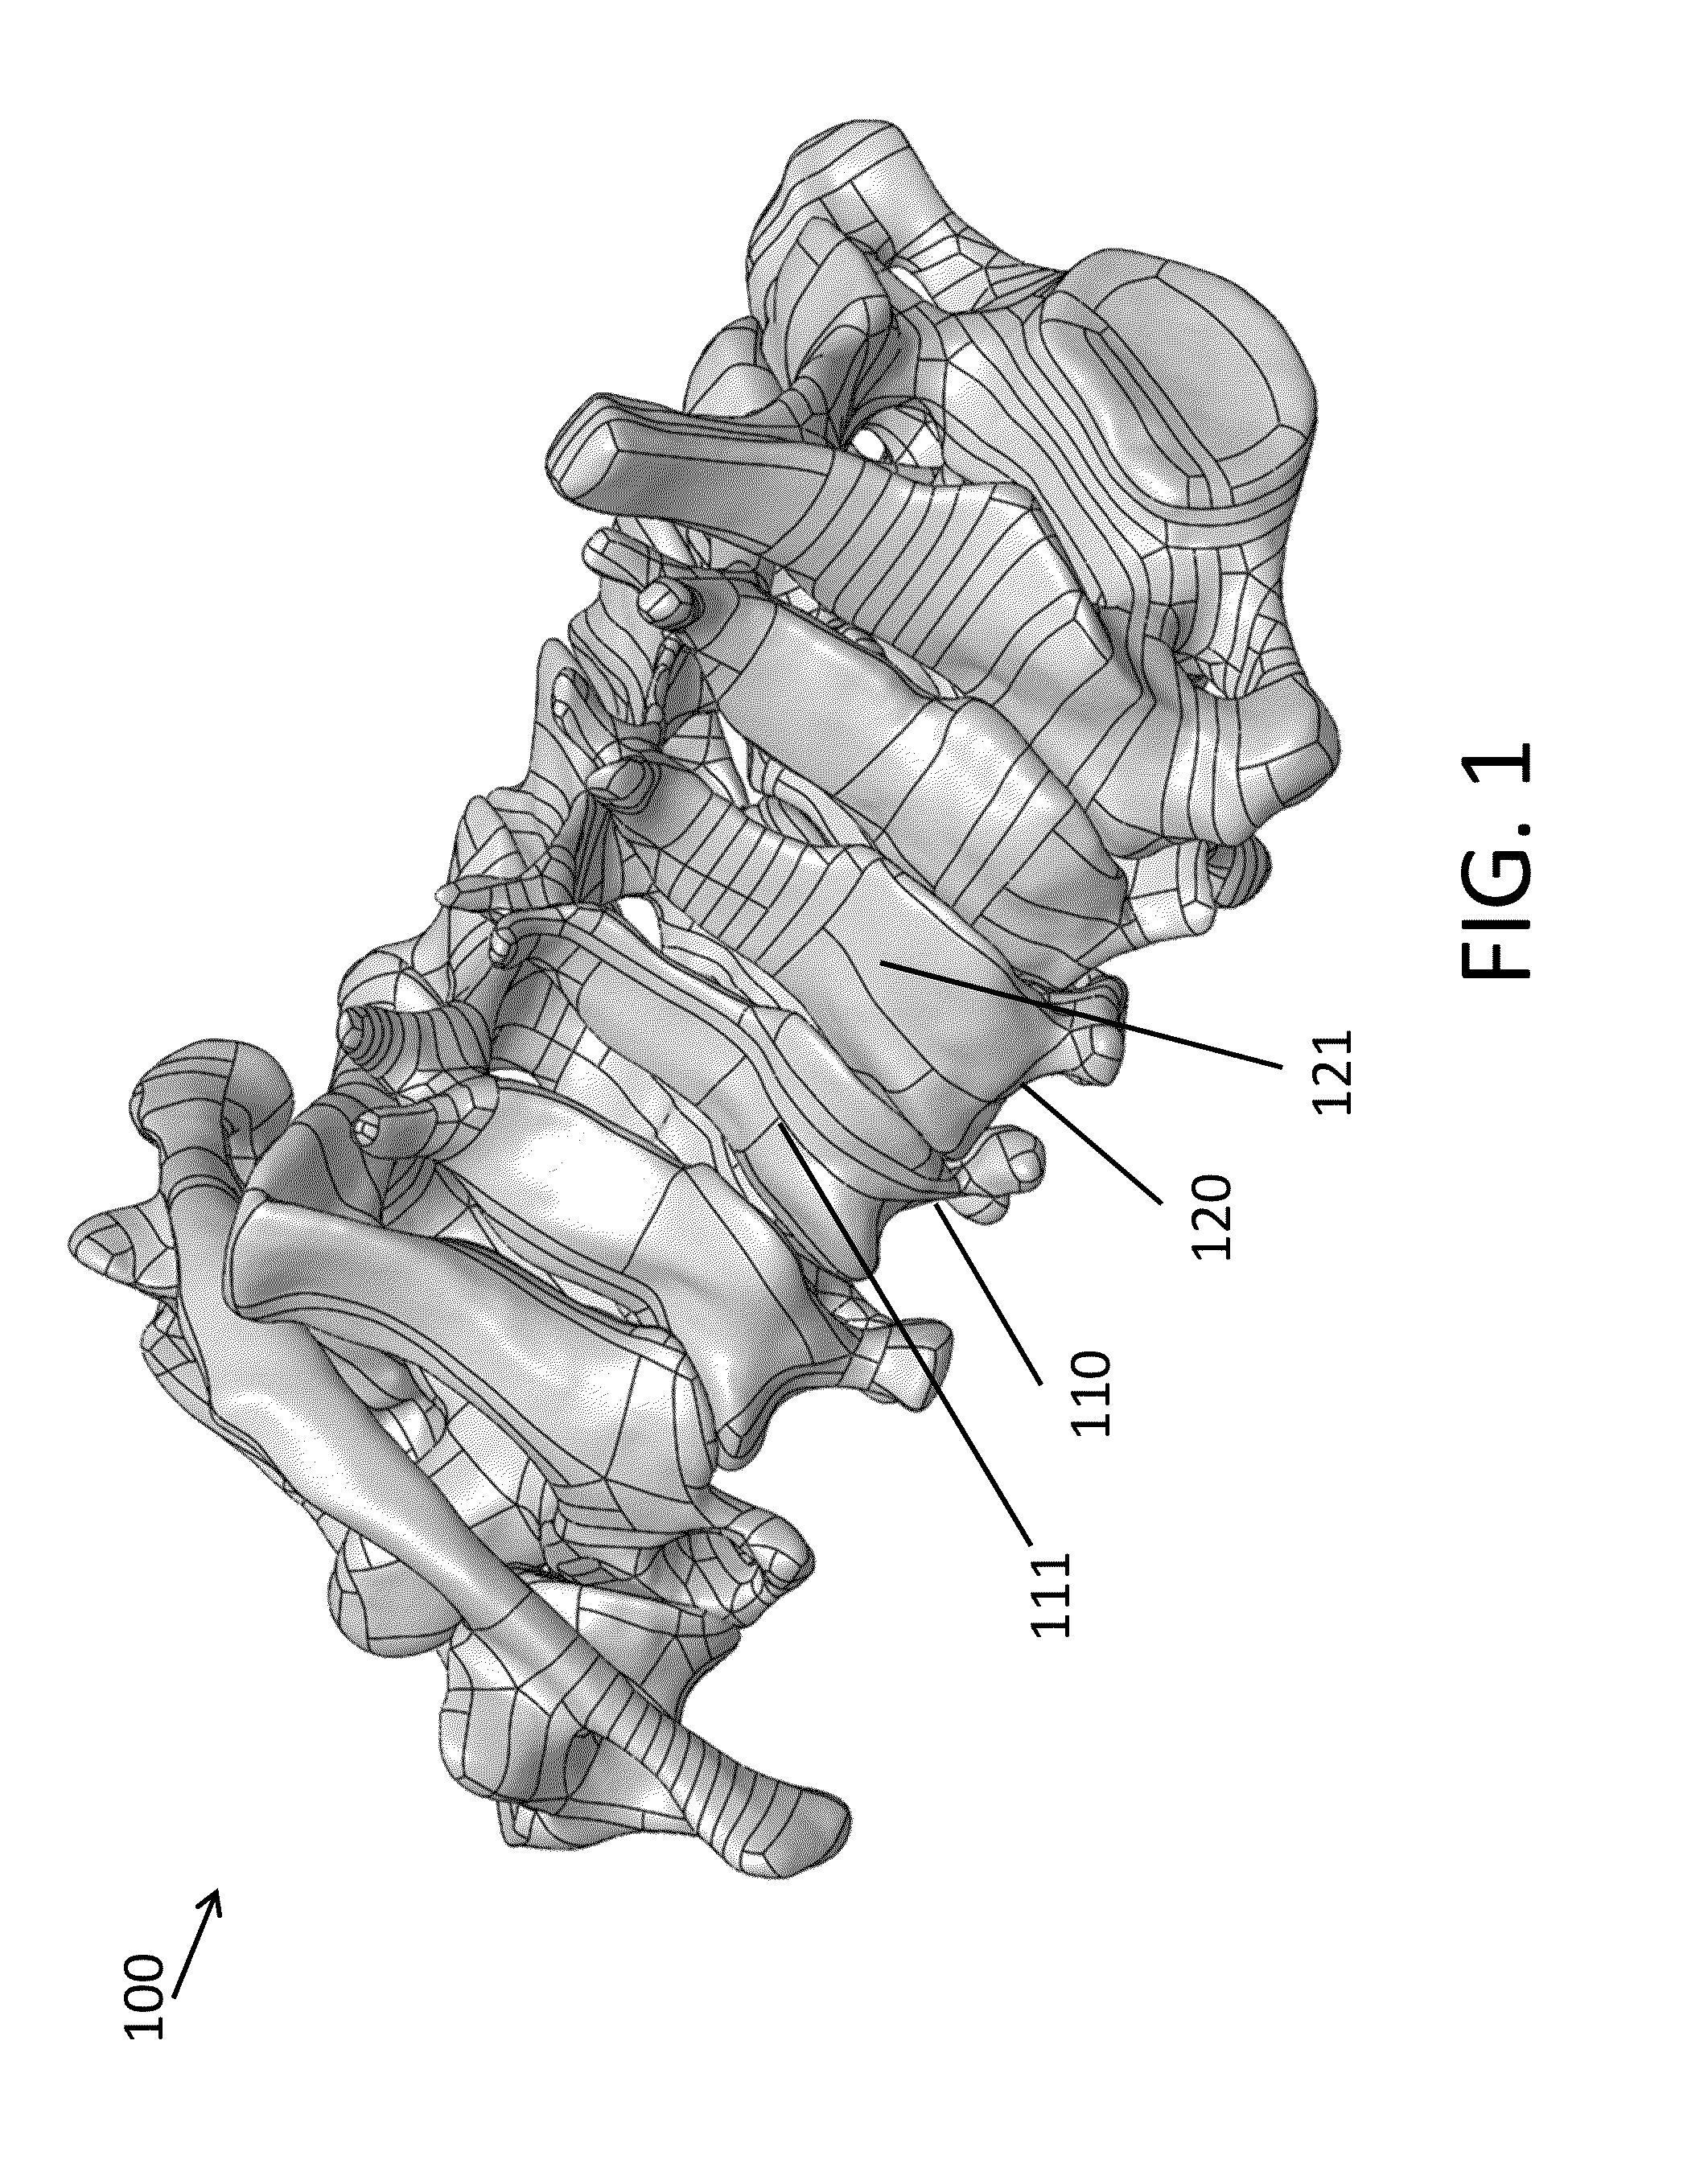 System and method for spinal fusion